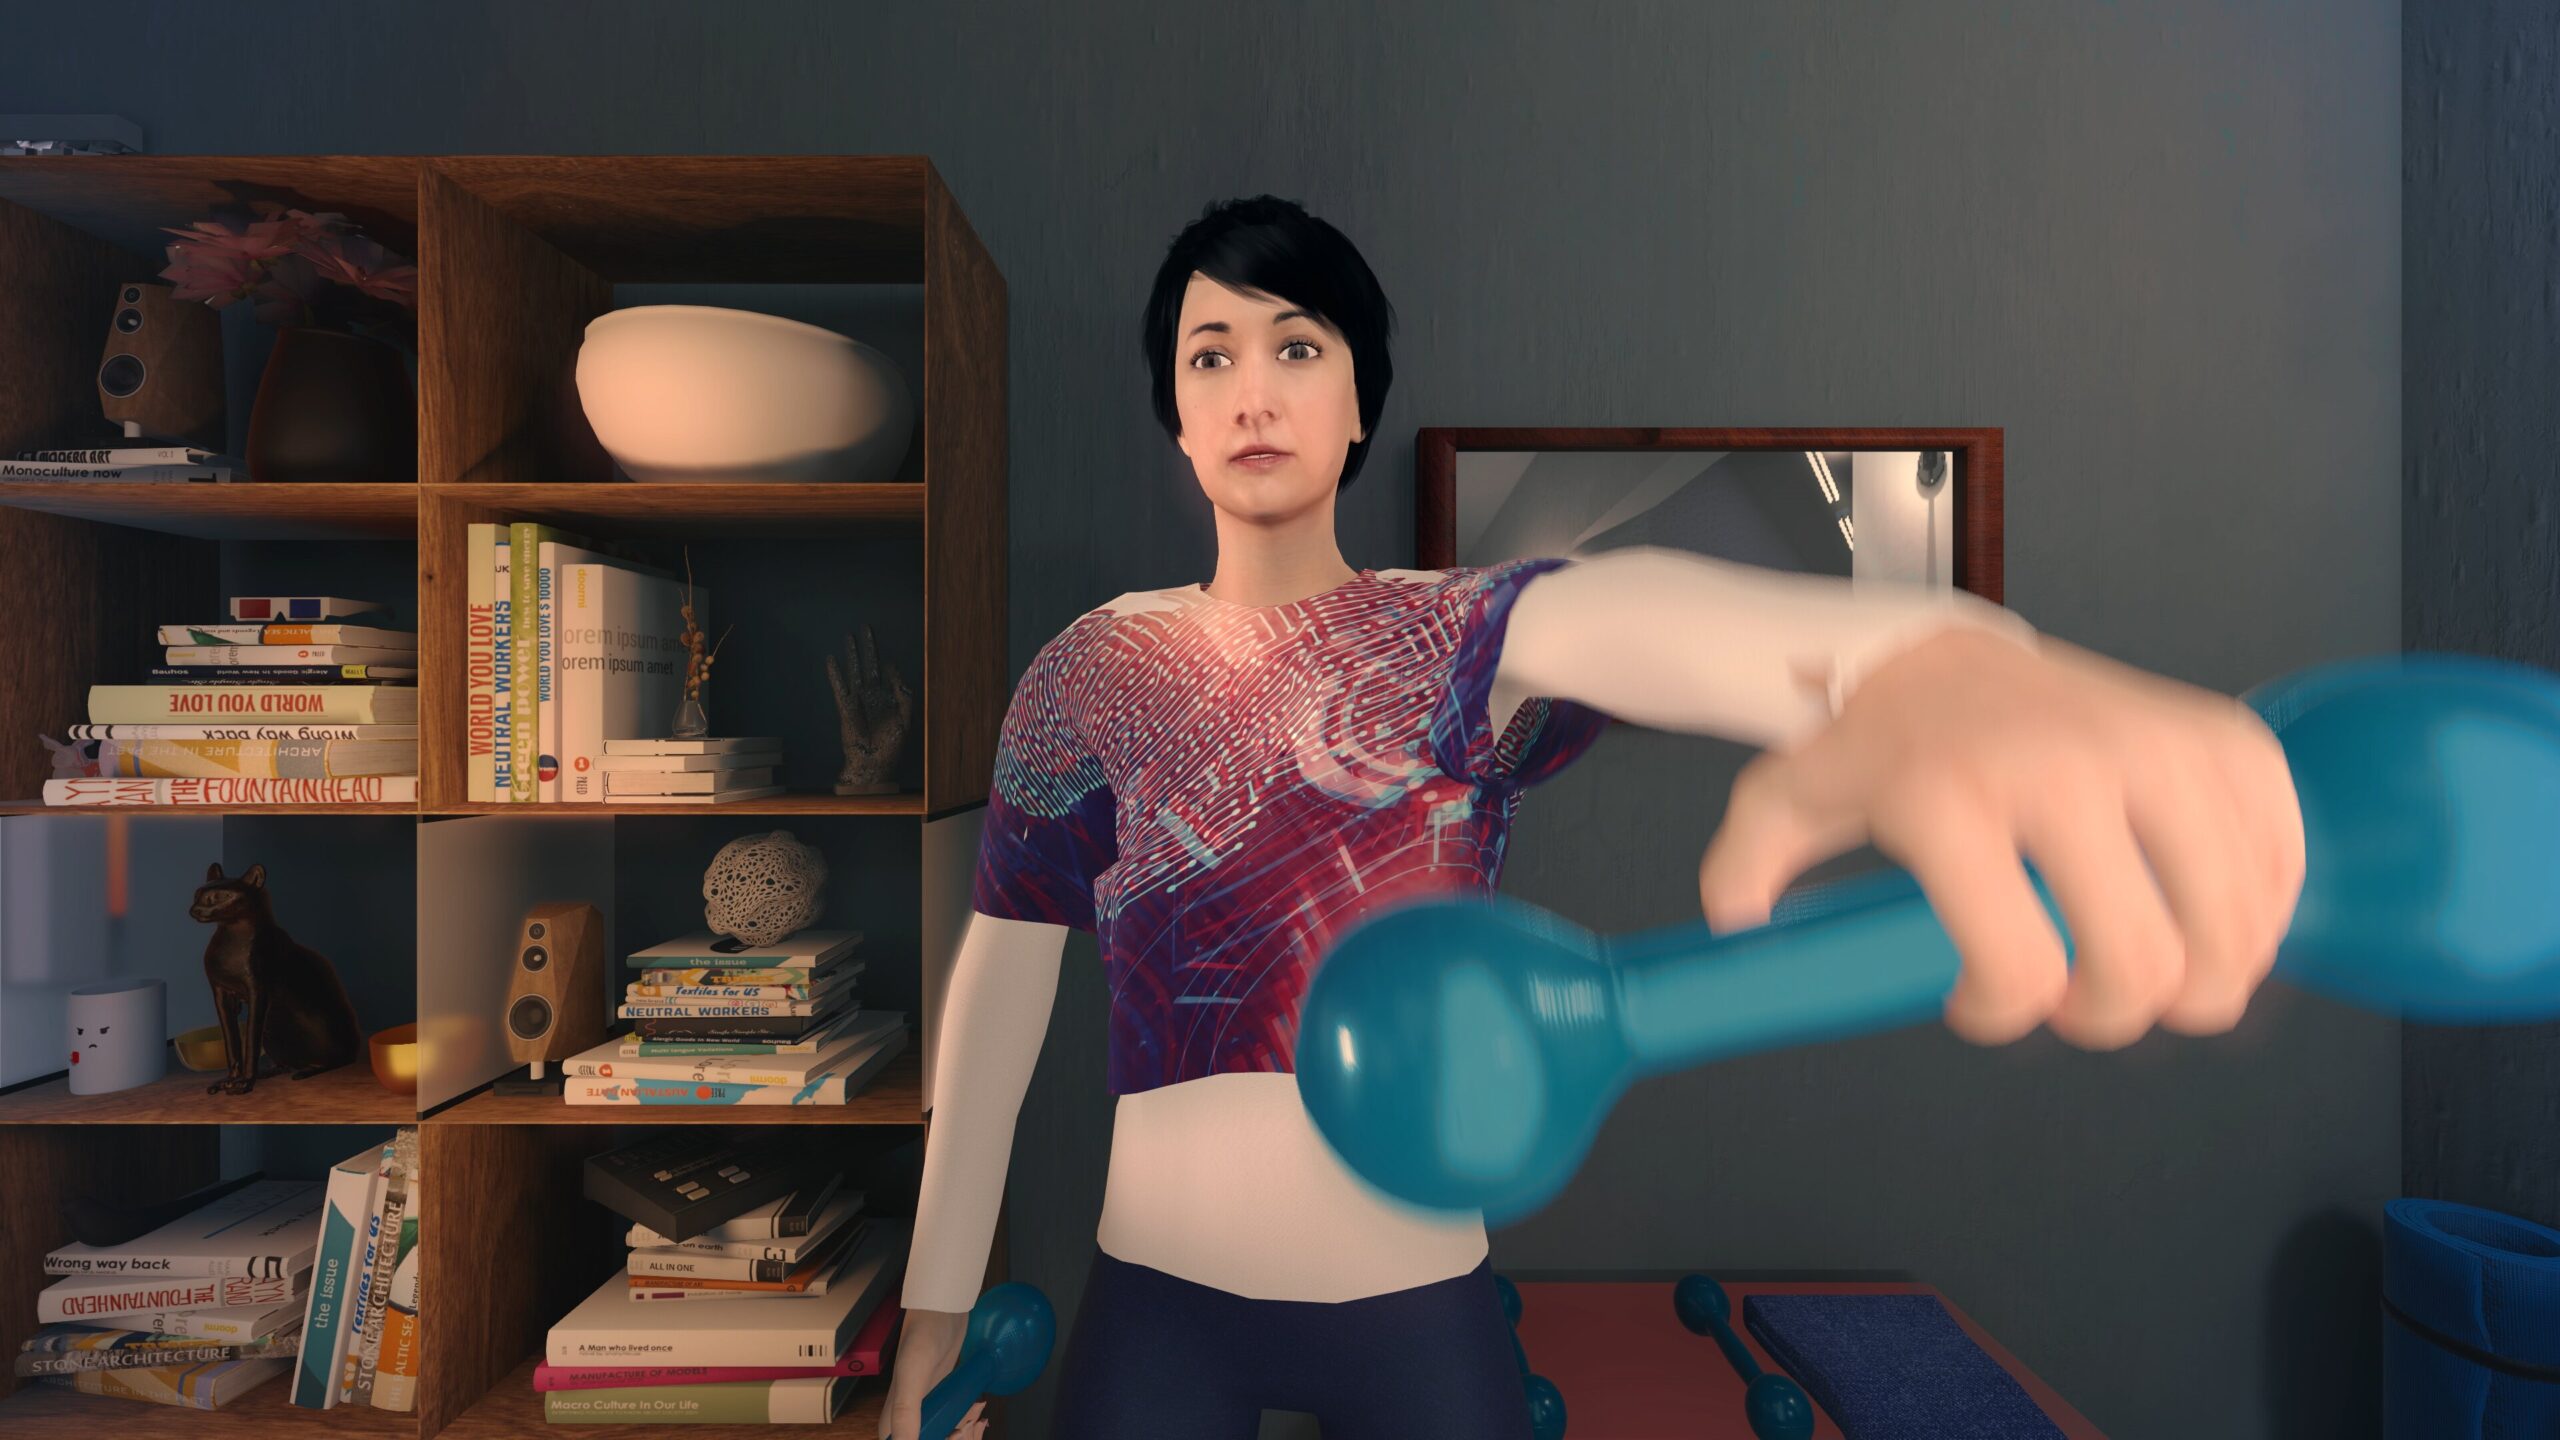 Animated image of a woman with short, black hair lifting a blue weight. Her hand is blurred and close to camera view.